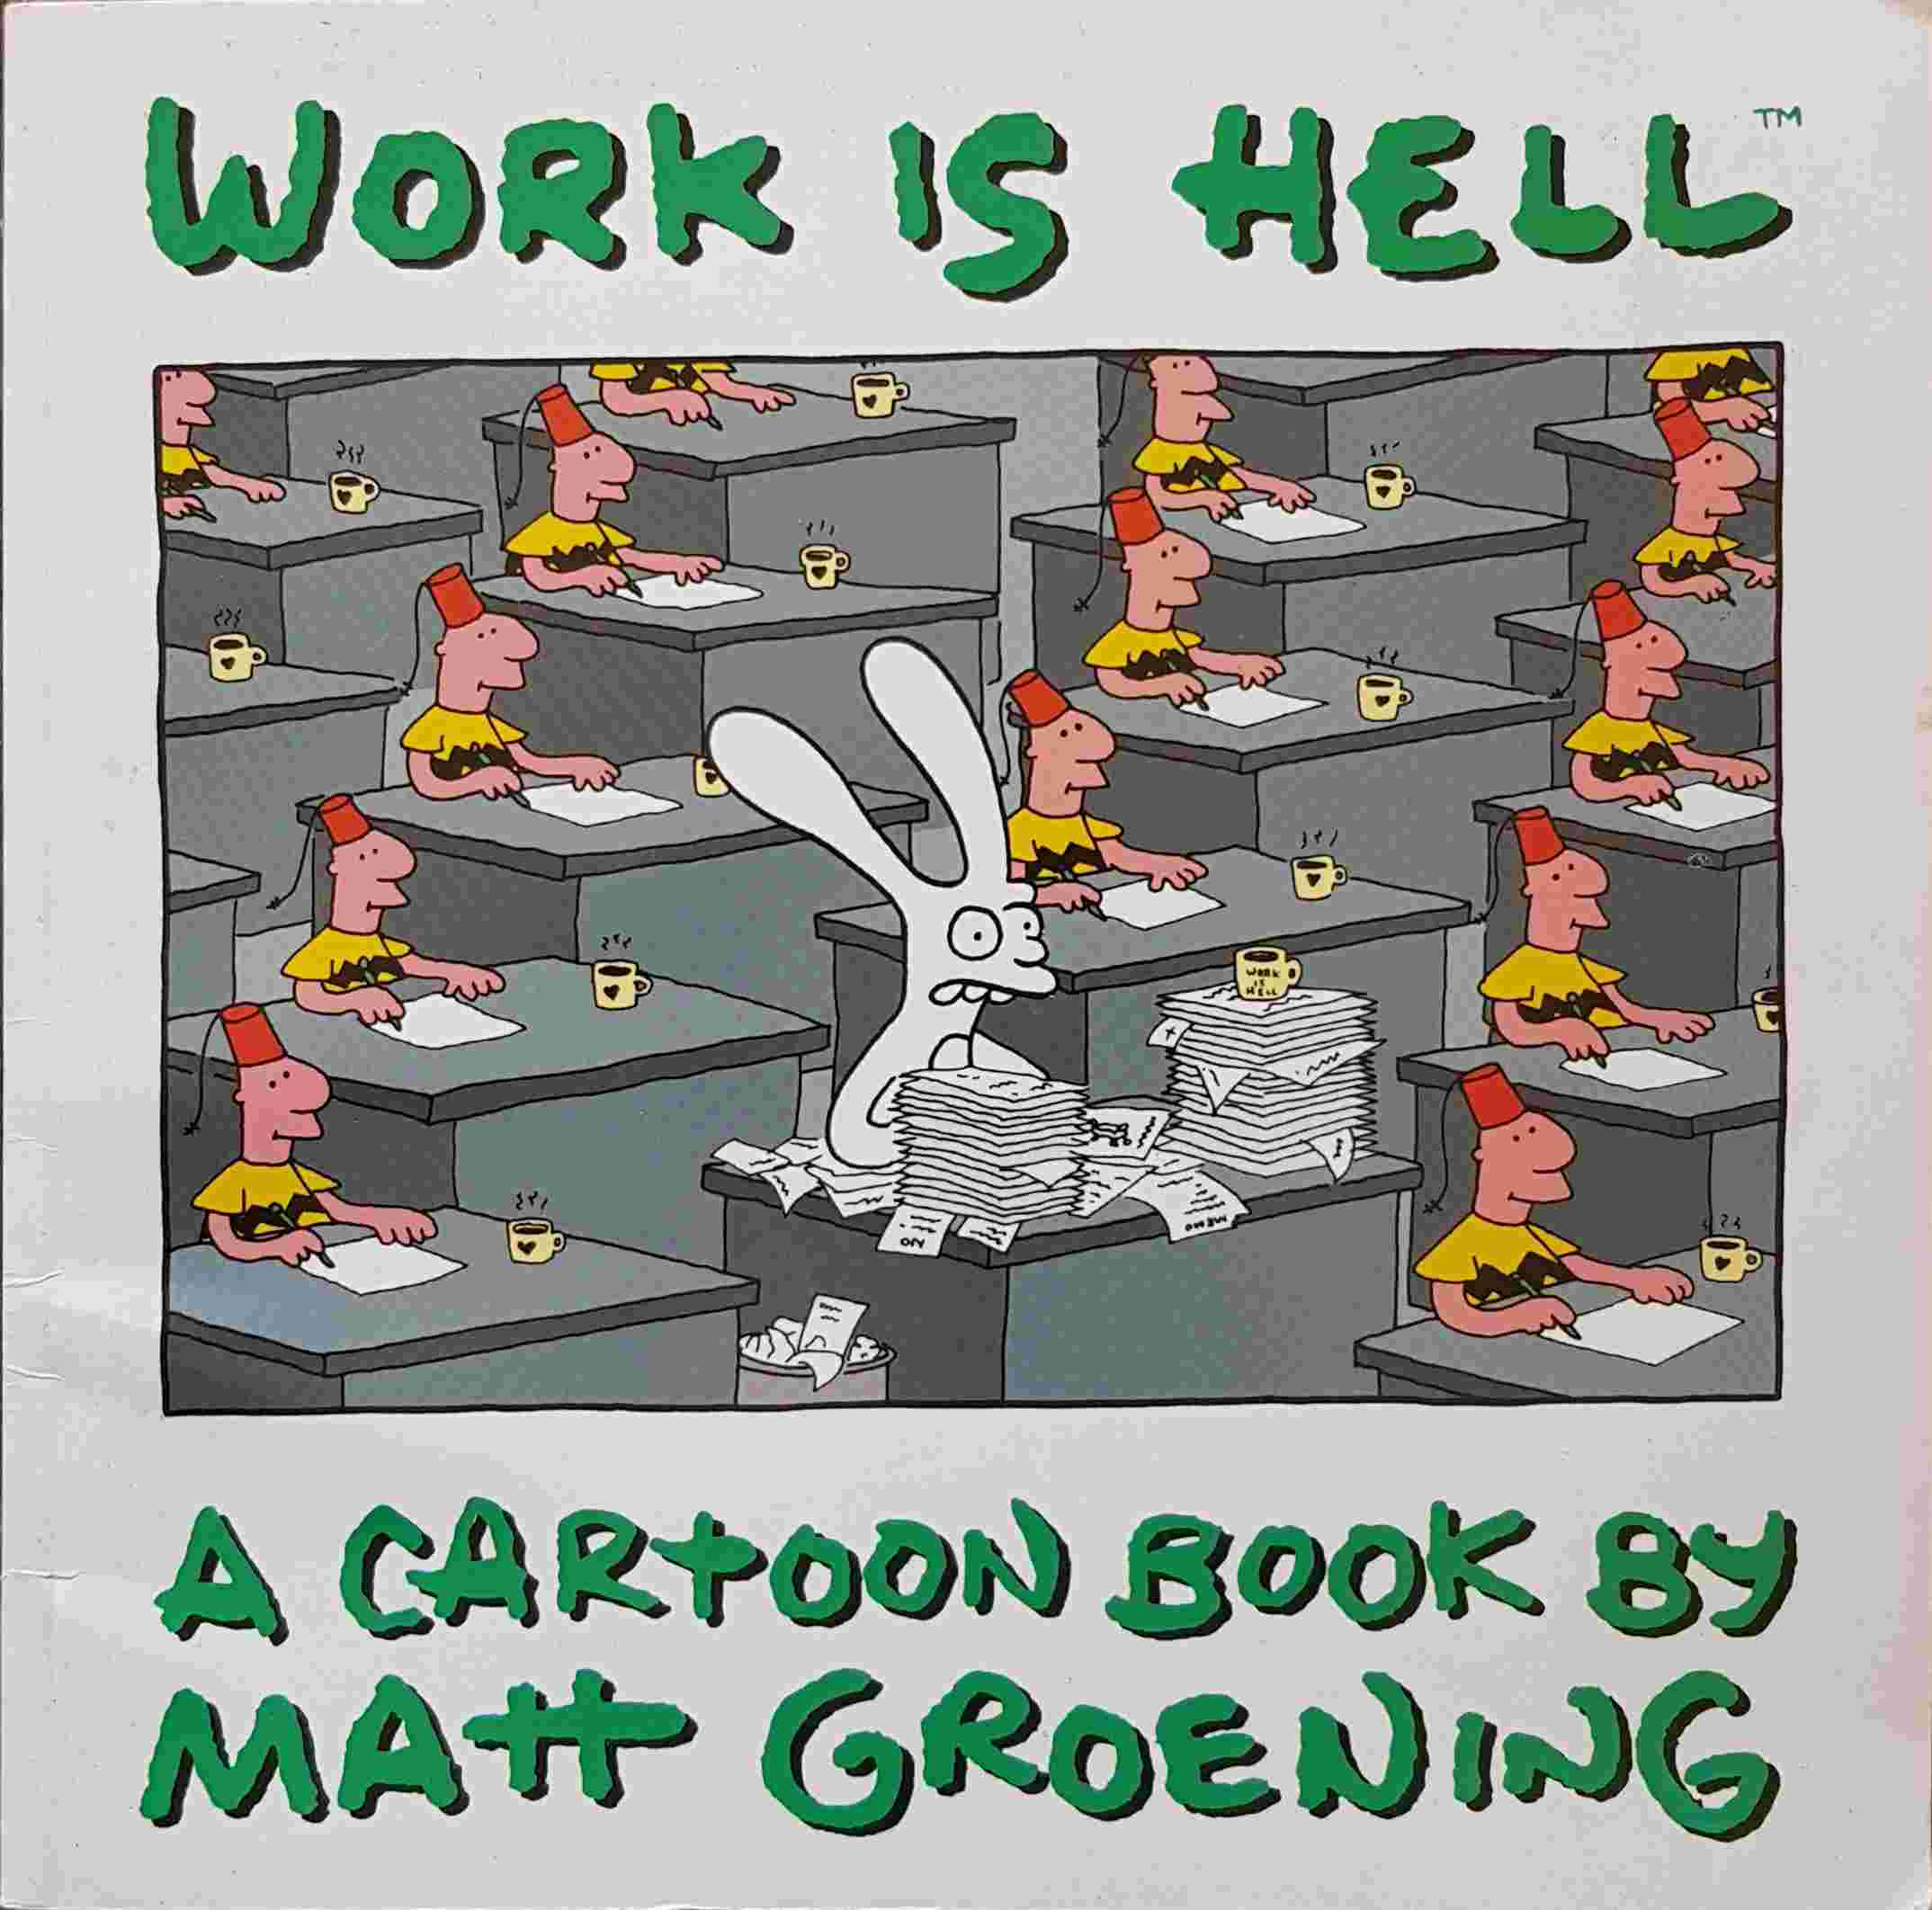 Picture of 0-00-718130-2 Work is hell by artist Matt Groening 